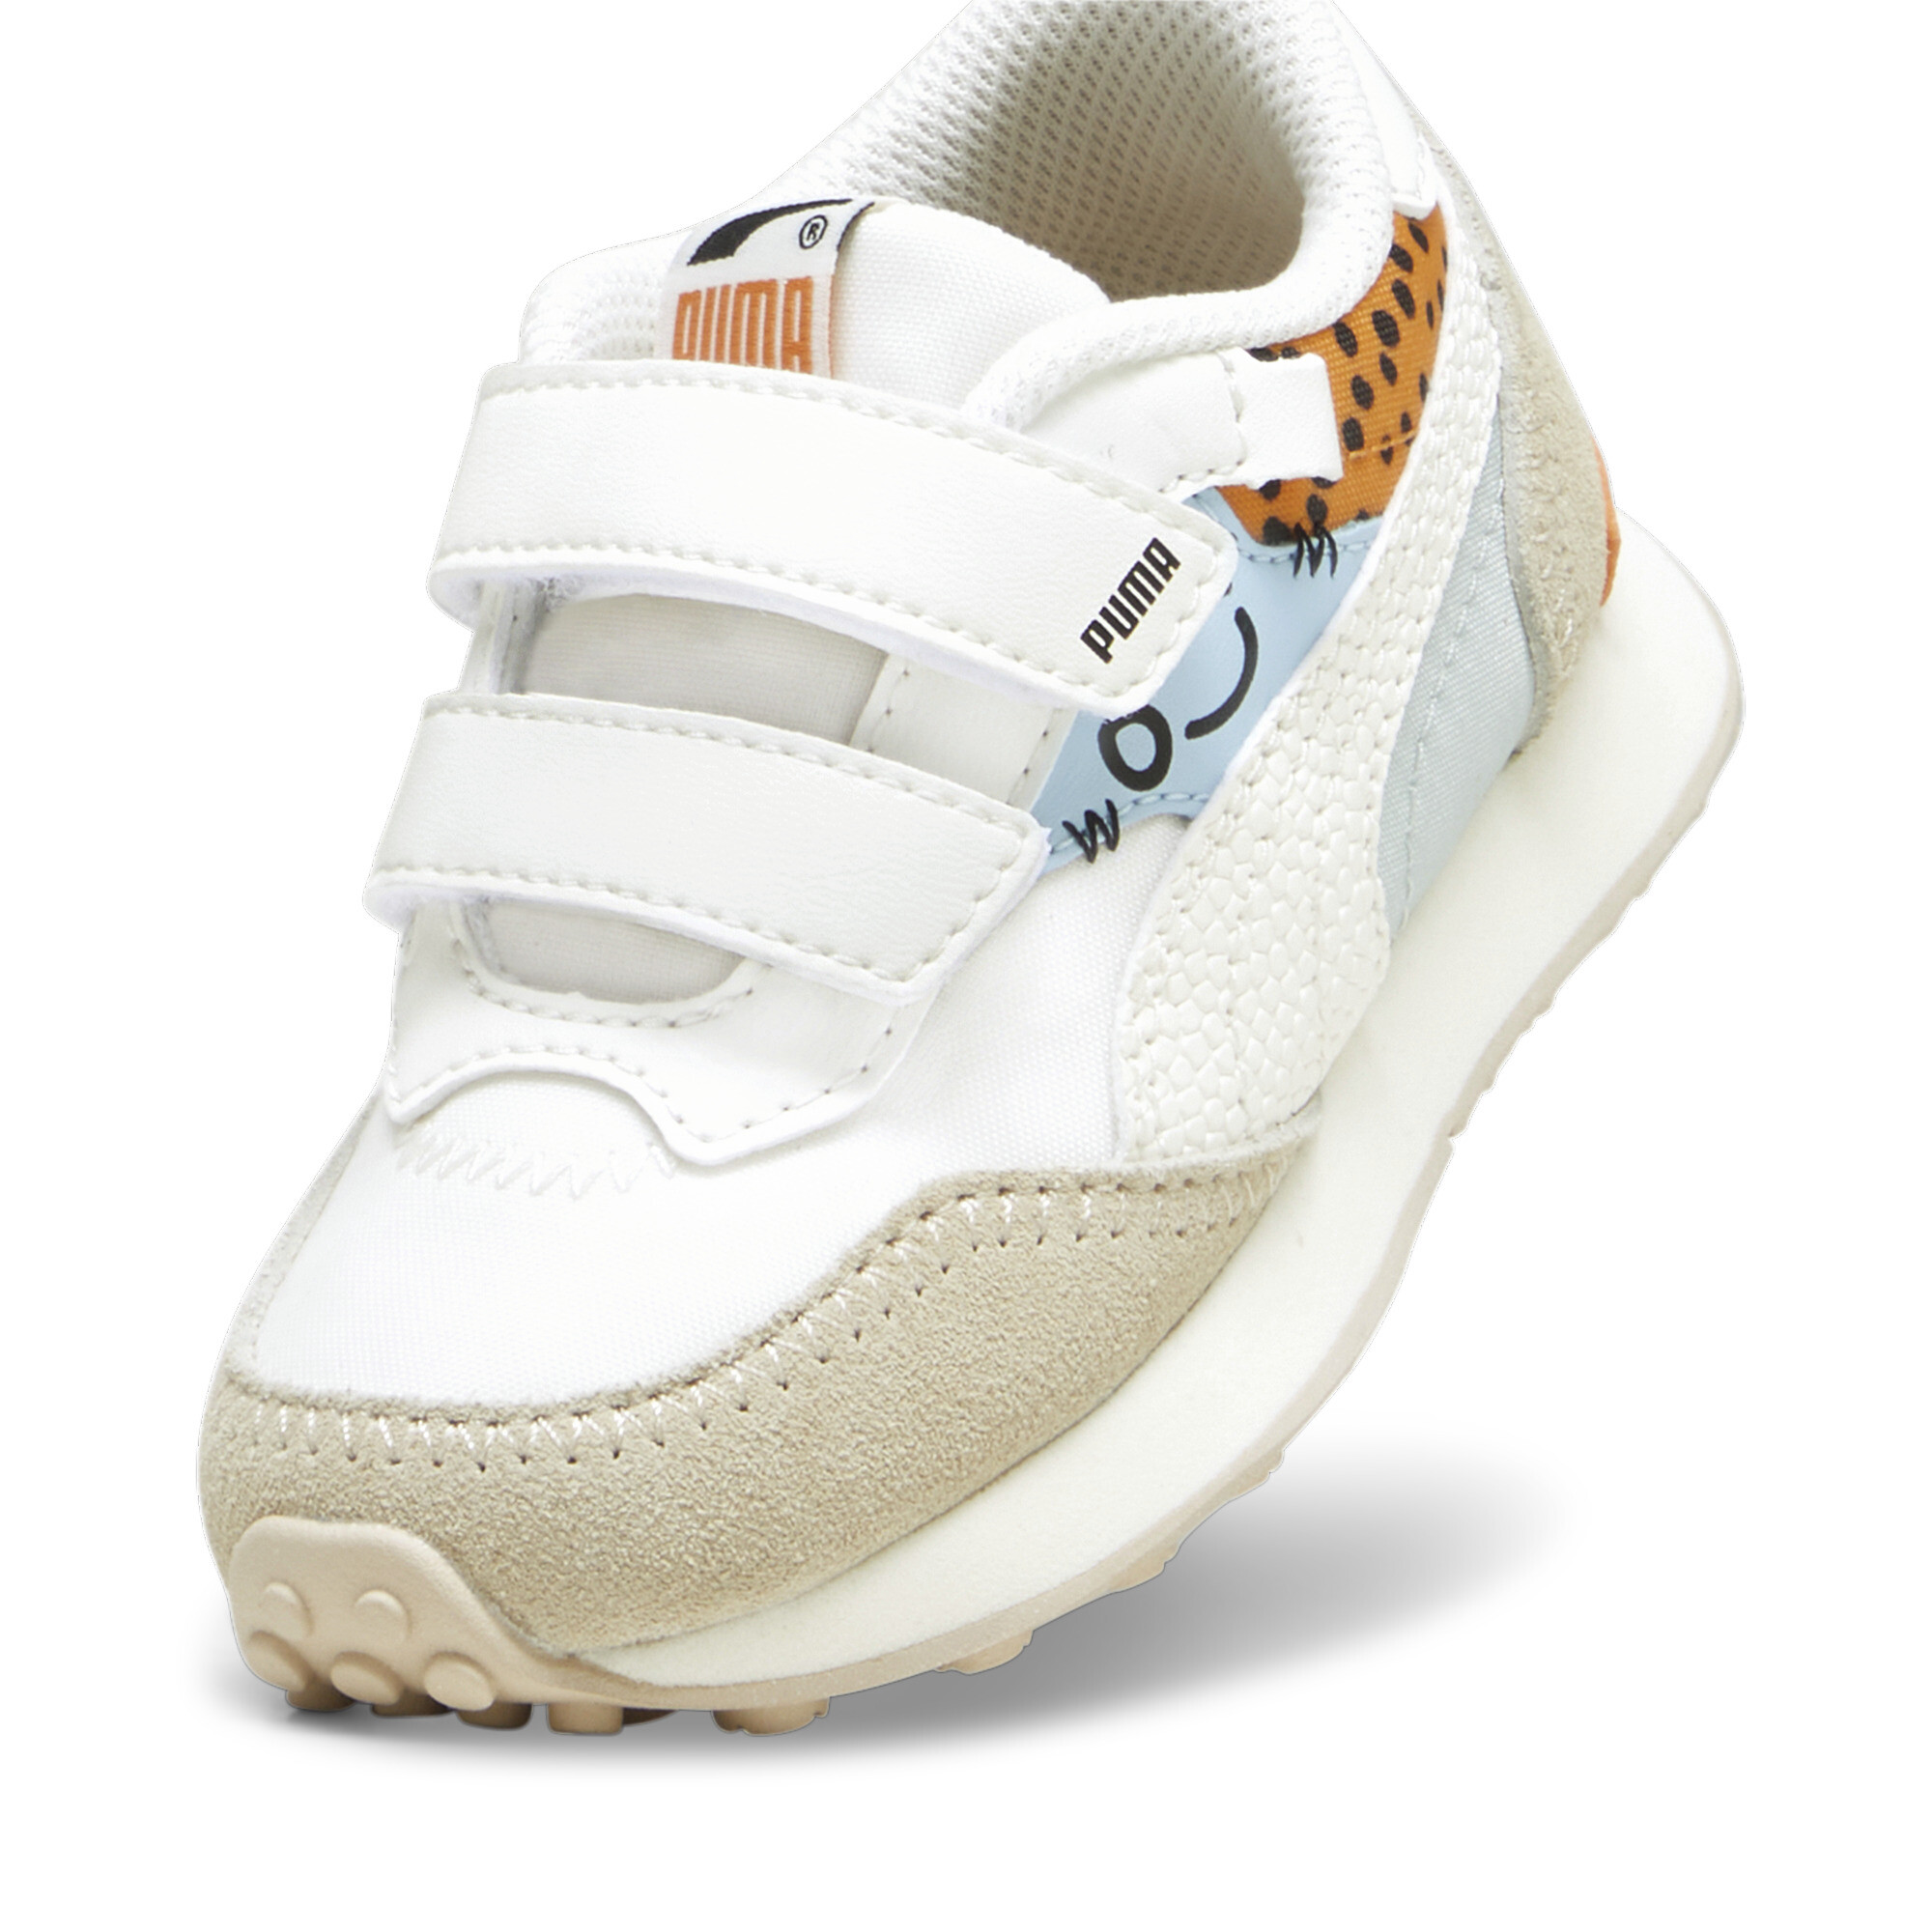 Kids' PUMA Rider FV Mix Match Toddlers' Sneakers In 20 - White, Size EU